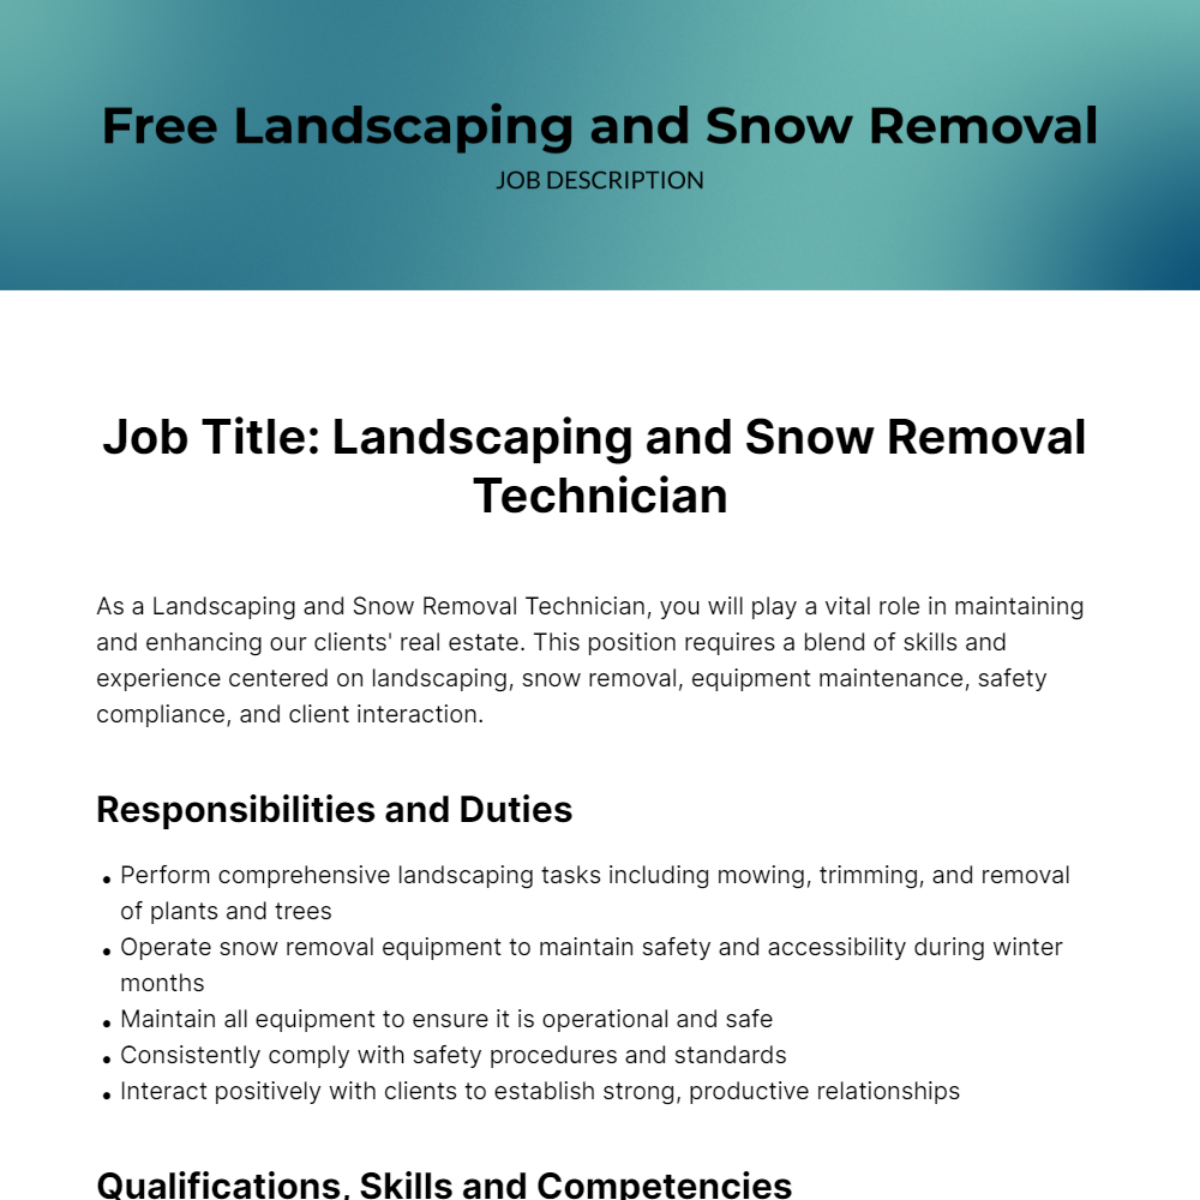 Free Landscaping and Snow Removal Job Description Template